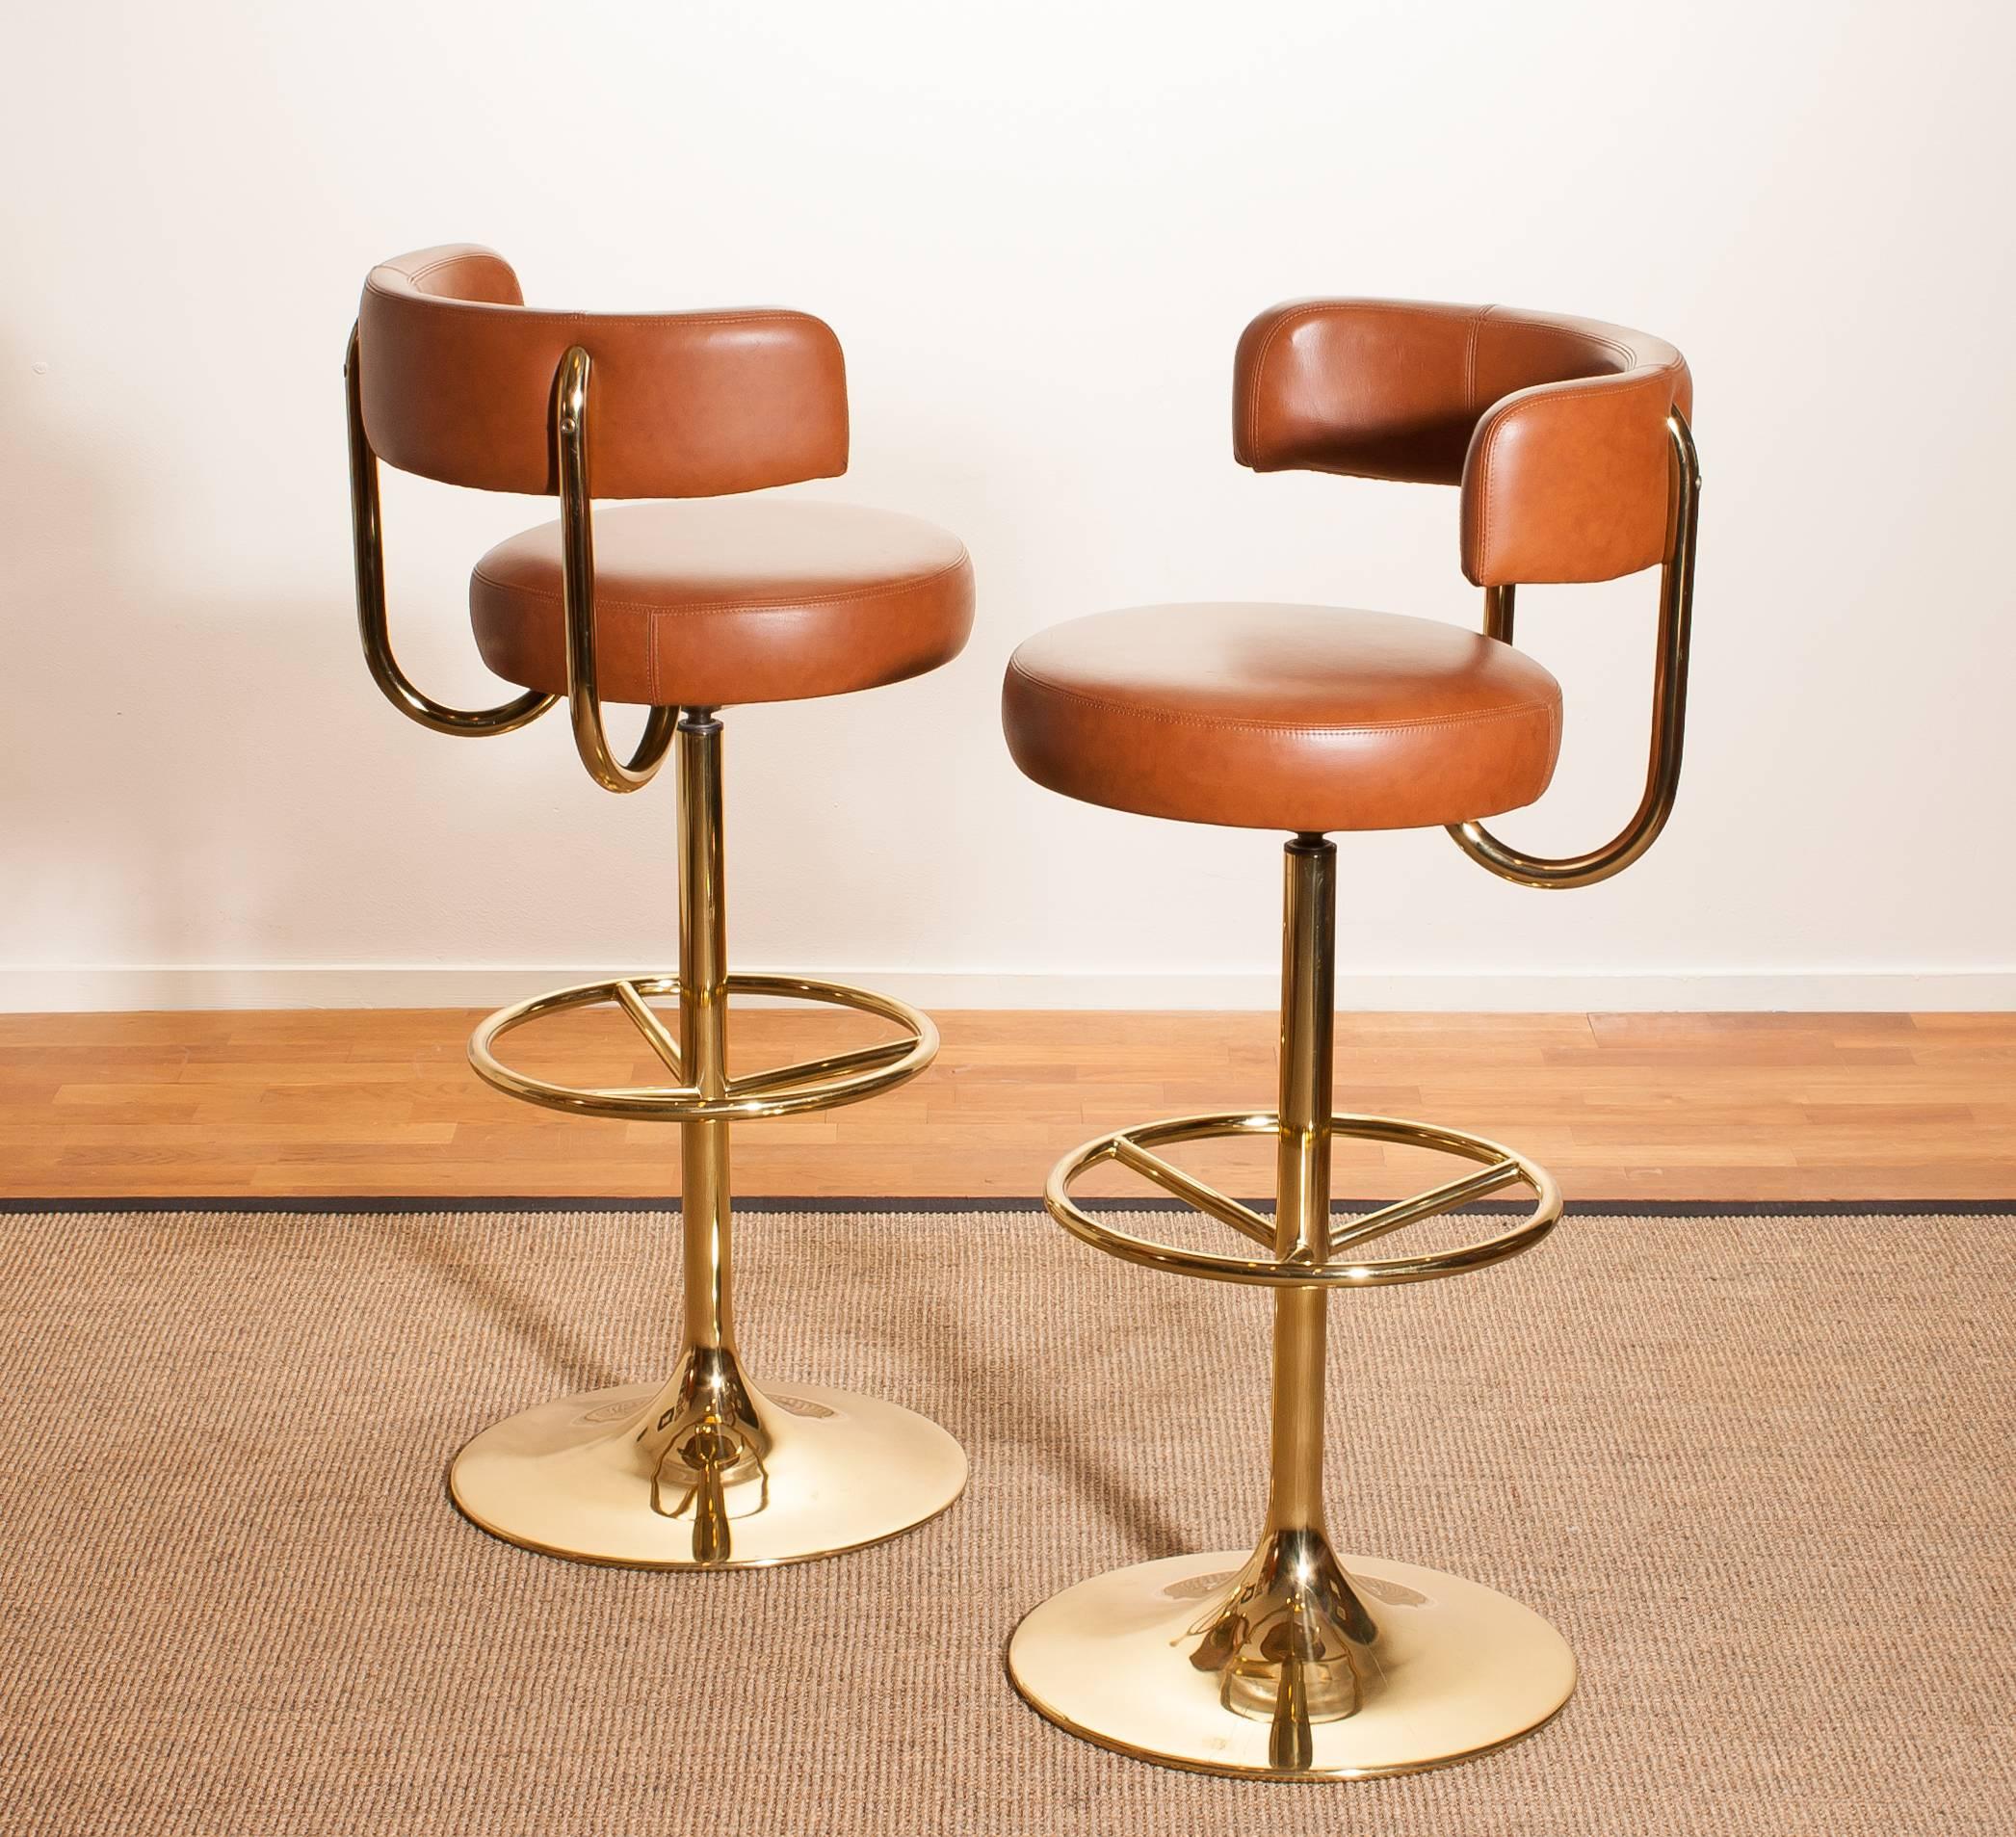 Faux Leather 1970s, a Brass Set of Bar Stools and Bar Table by Börje Johanson